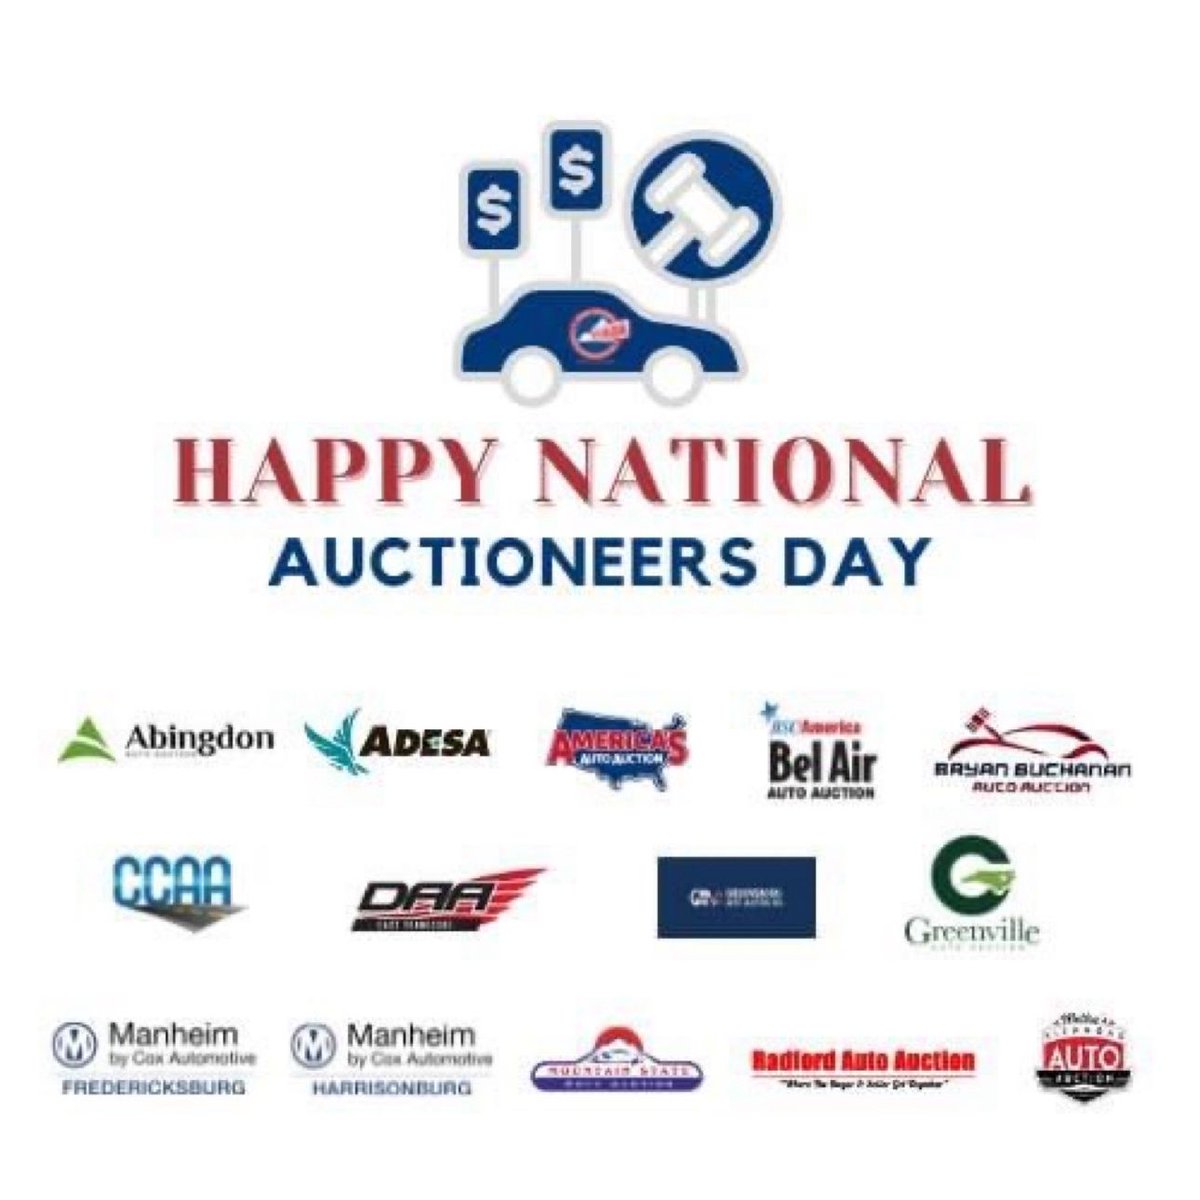 Happy National Auctioneer Day! Today, we celebrate the talented individuals who bring excitement and energy to the world of auctions. We want to give a big shoutout and a heartfelt thank you to all the car auctions that we have the pleasure of working with.